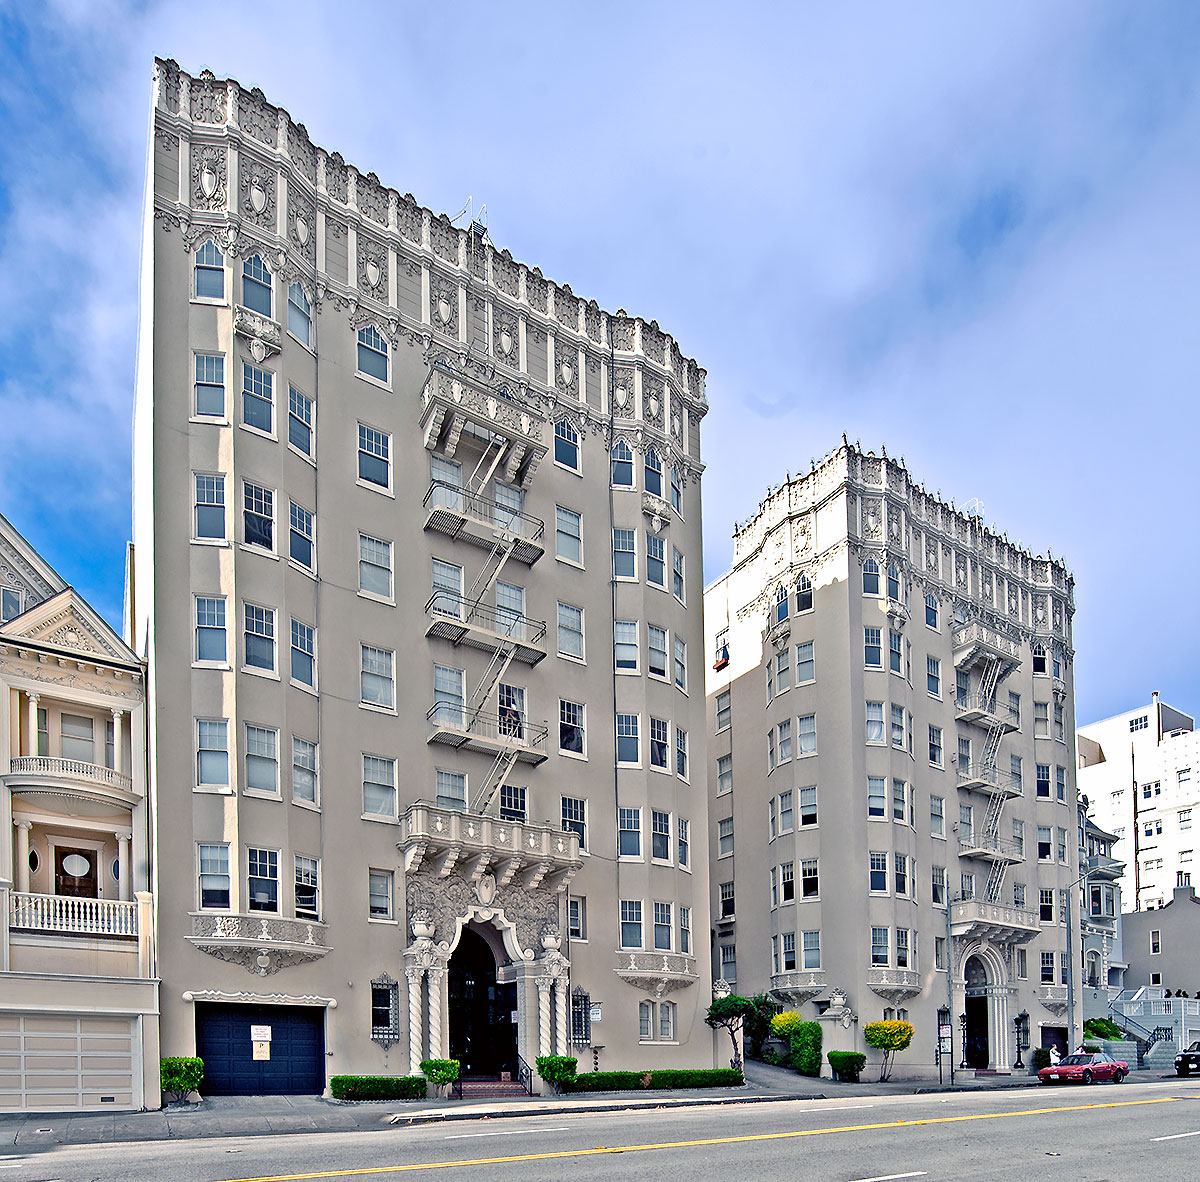 1945/1955 Broadway in Pacific Heights, designed by H. C. Baumann, built 1929